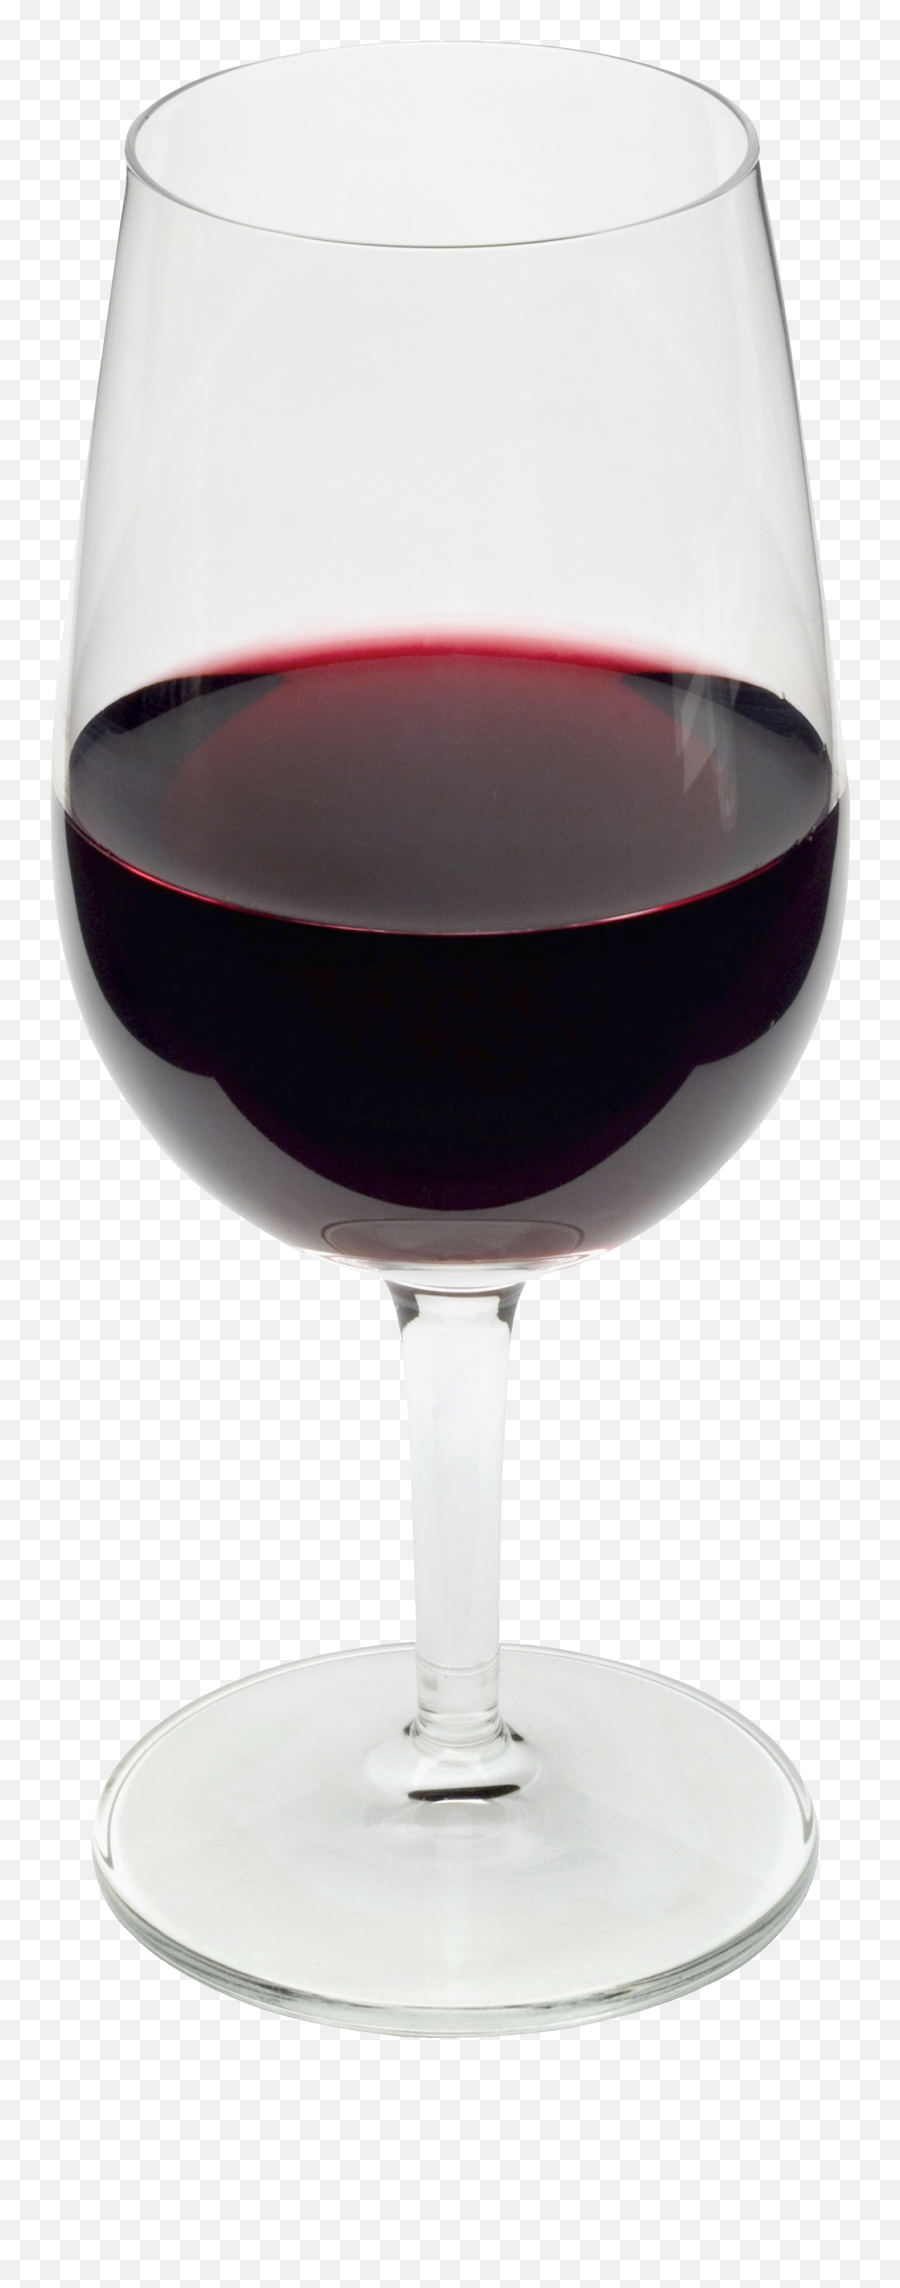 Wine Bottle And Glass Dh - Transparent Background Red Wine Glass Png,Wine Bottle Transparent Background